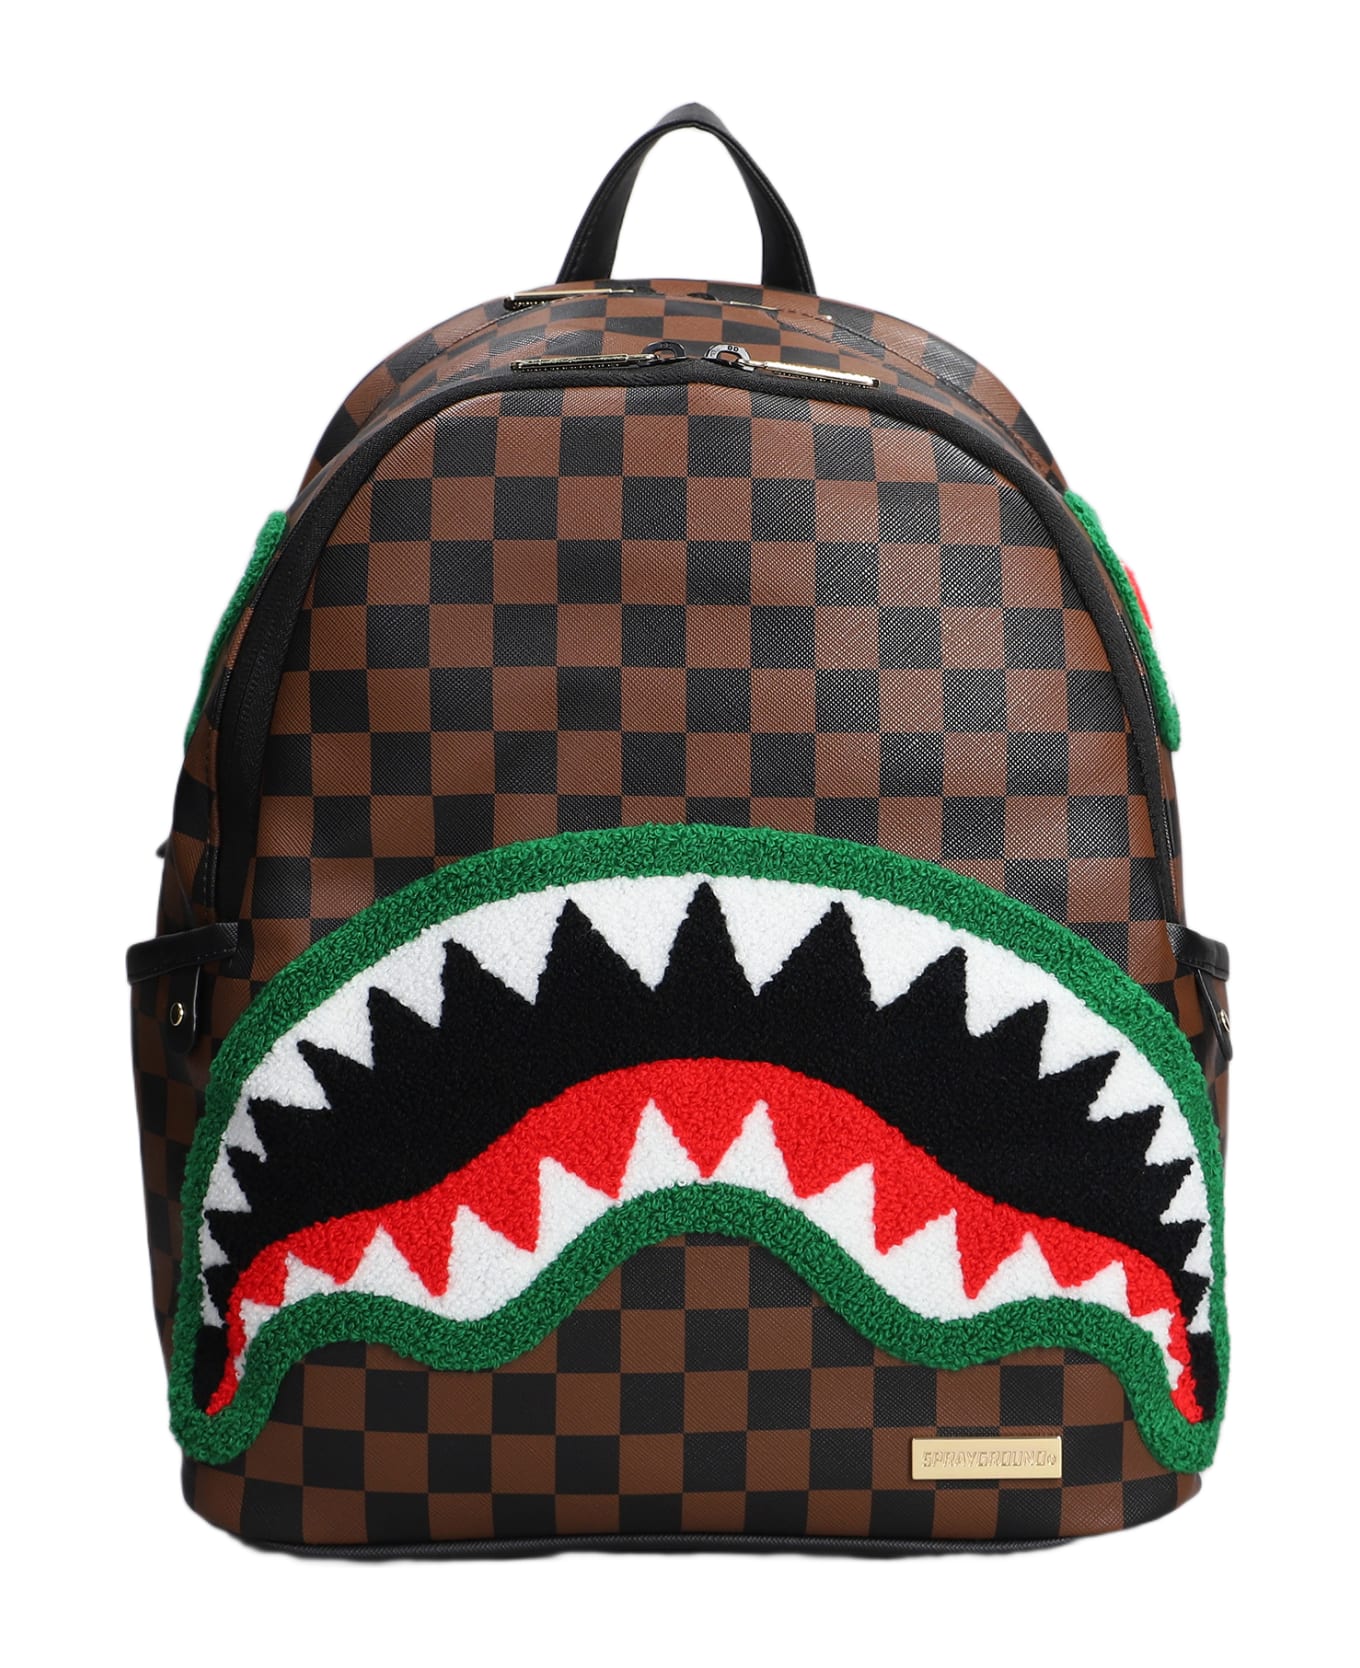 Sprayground Backpack In Brown Pvc - Marrone バックパック